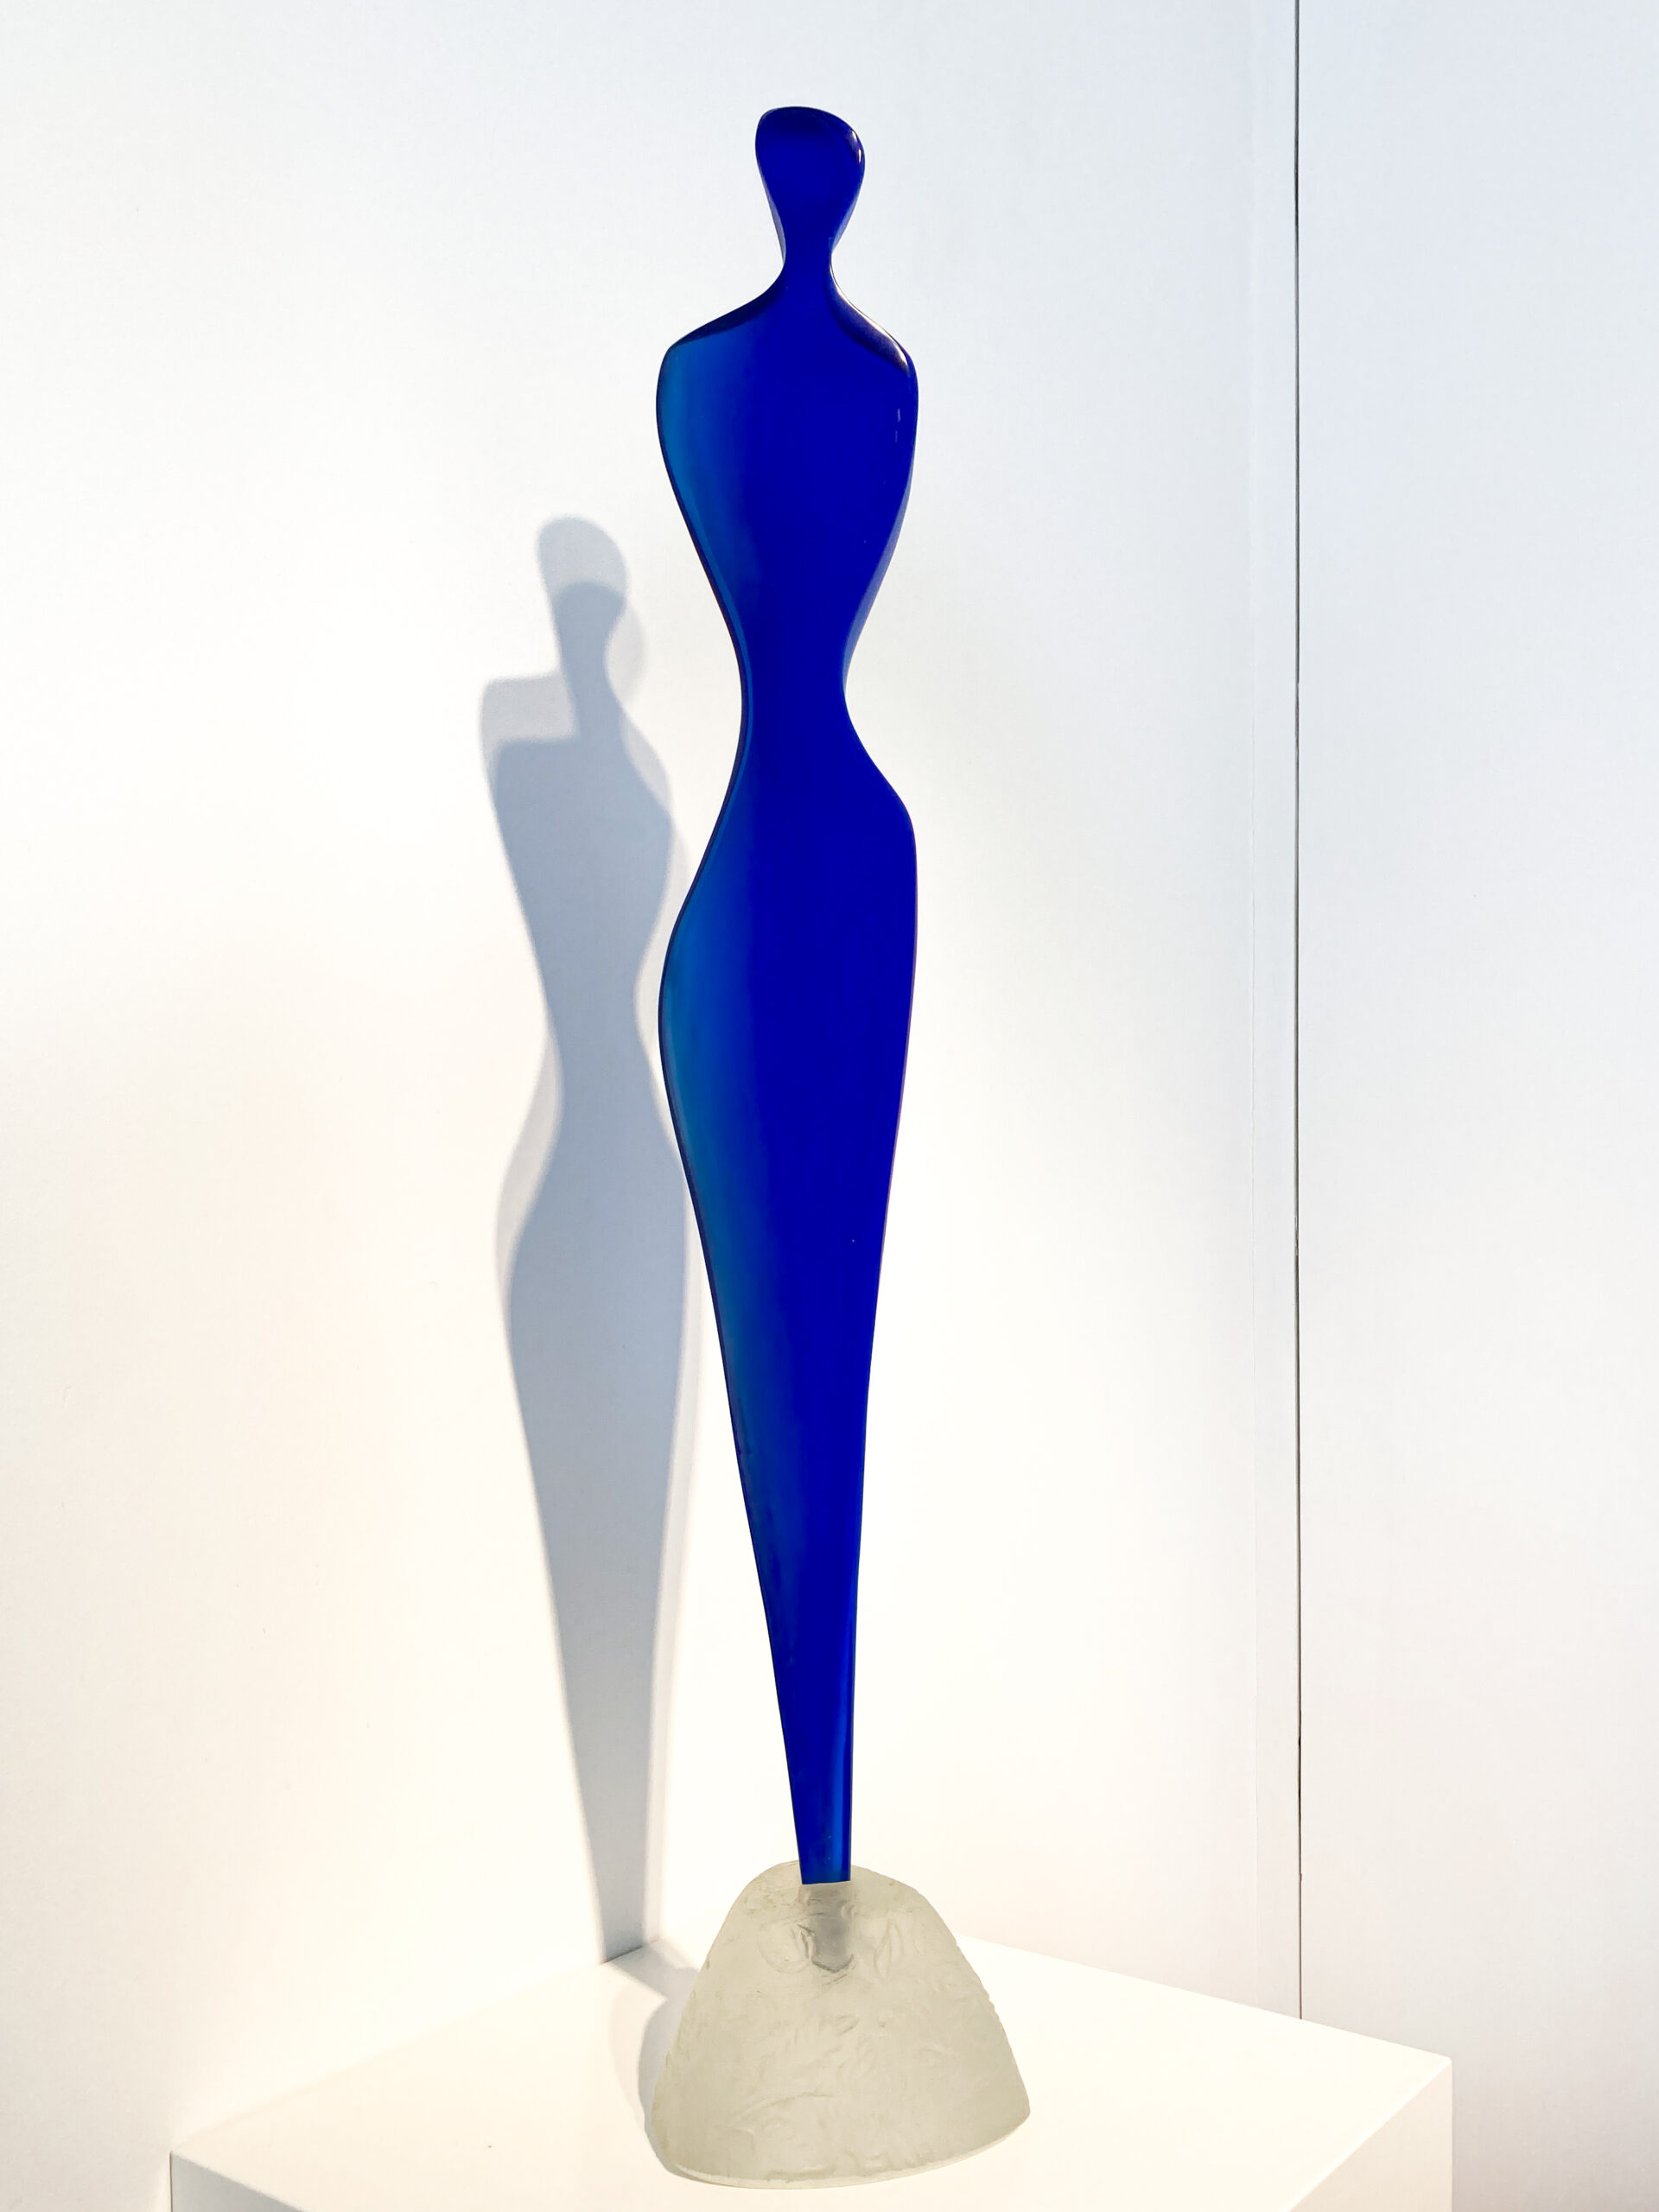 A blue glass sculpture of a long curved female figure